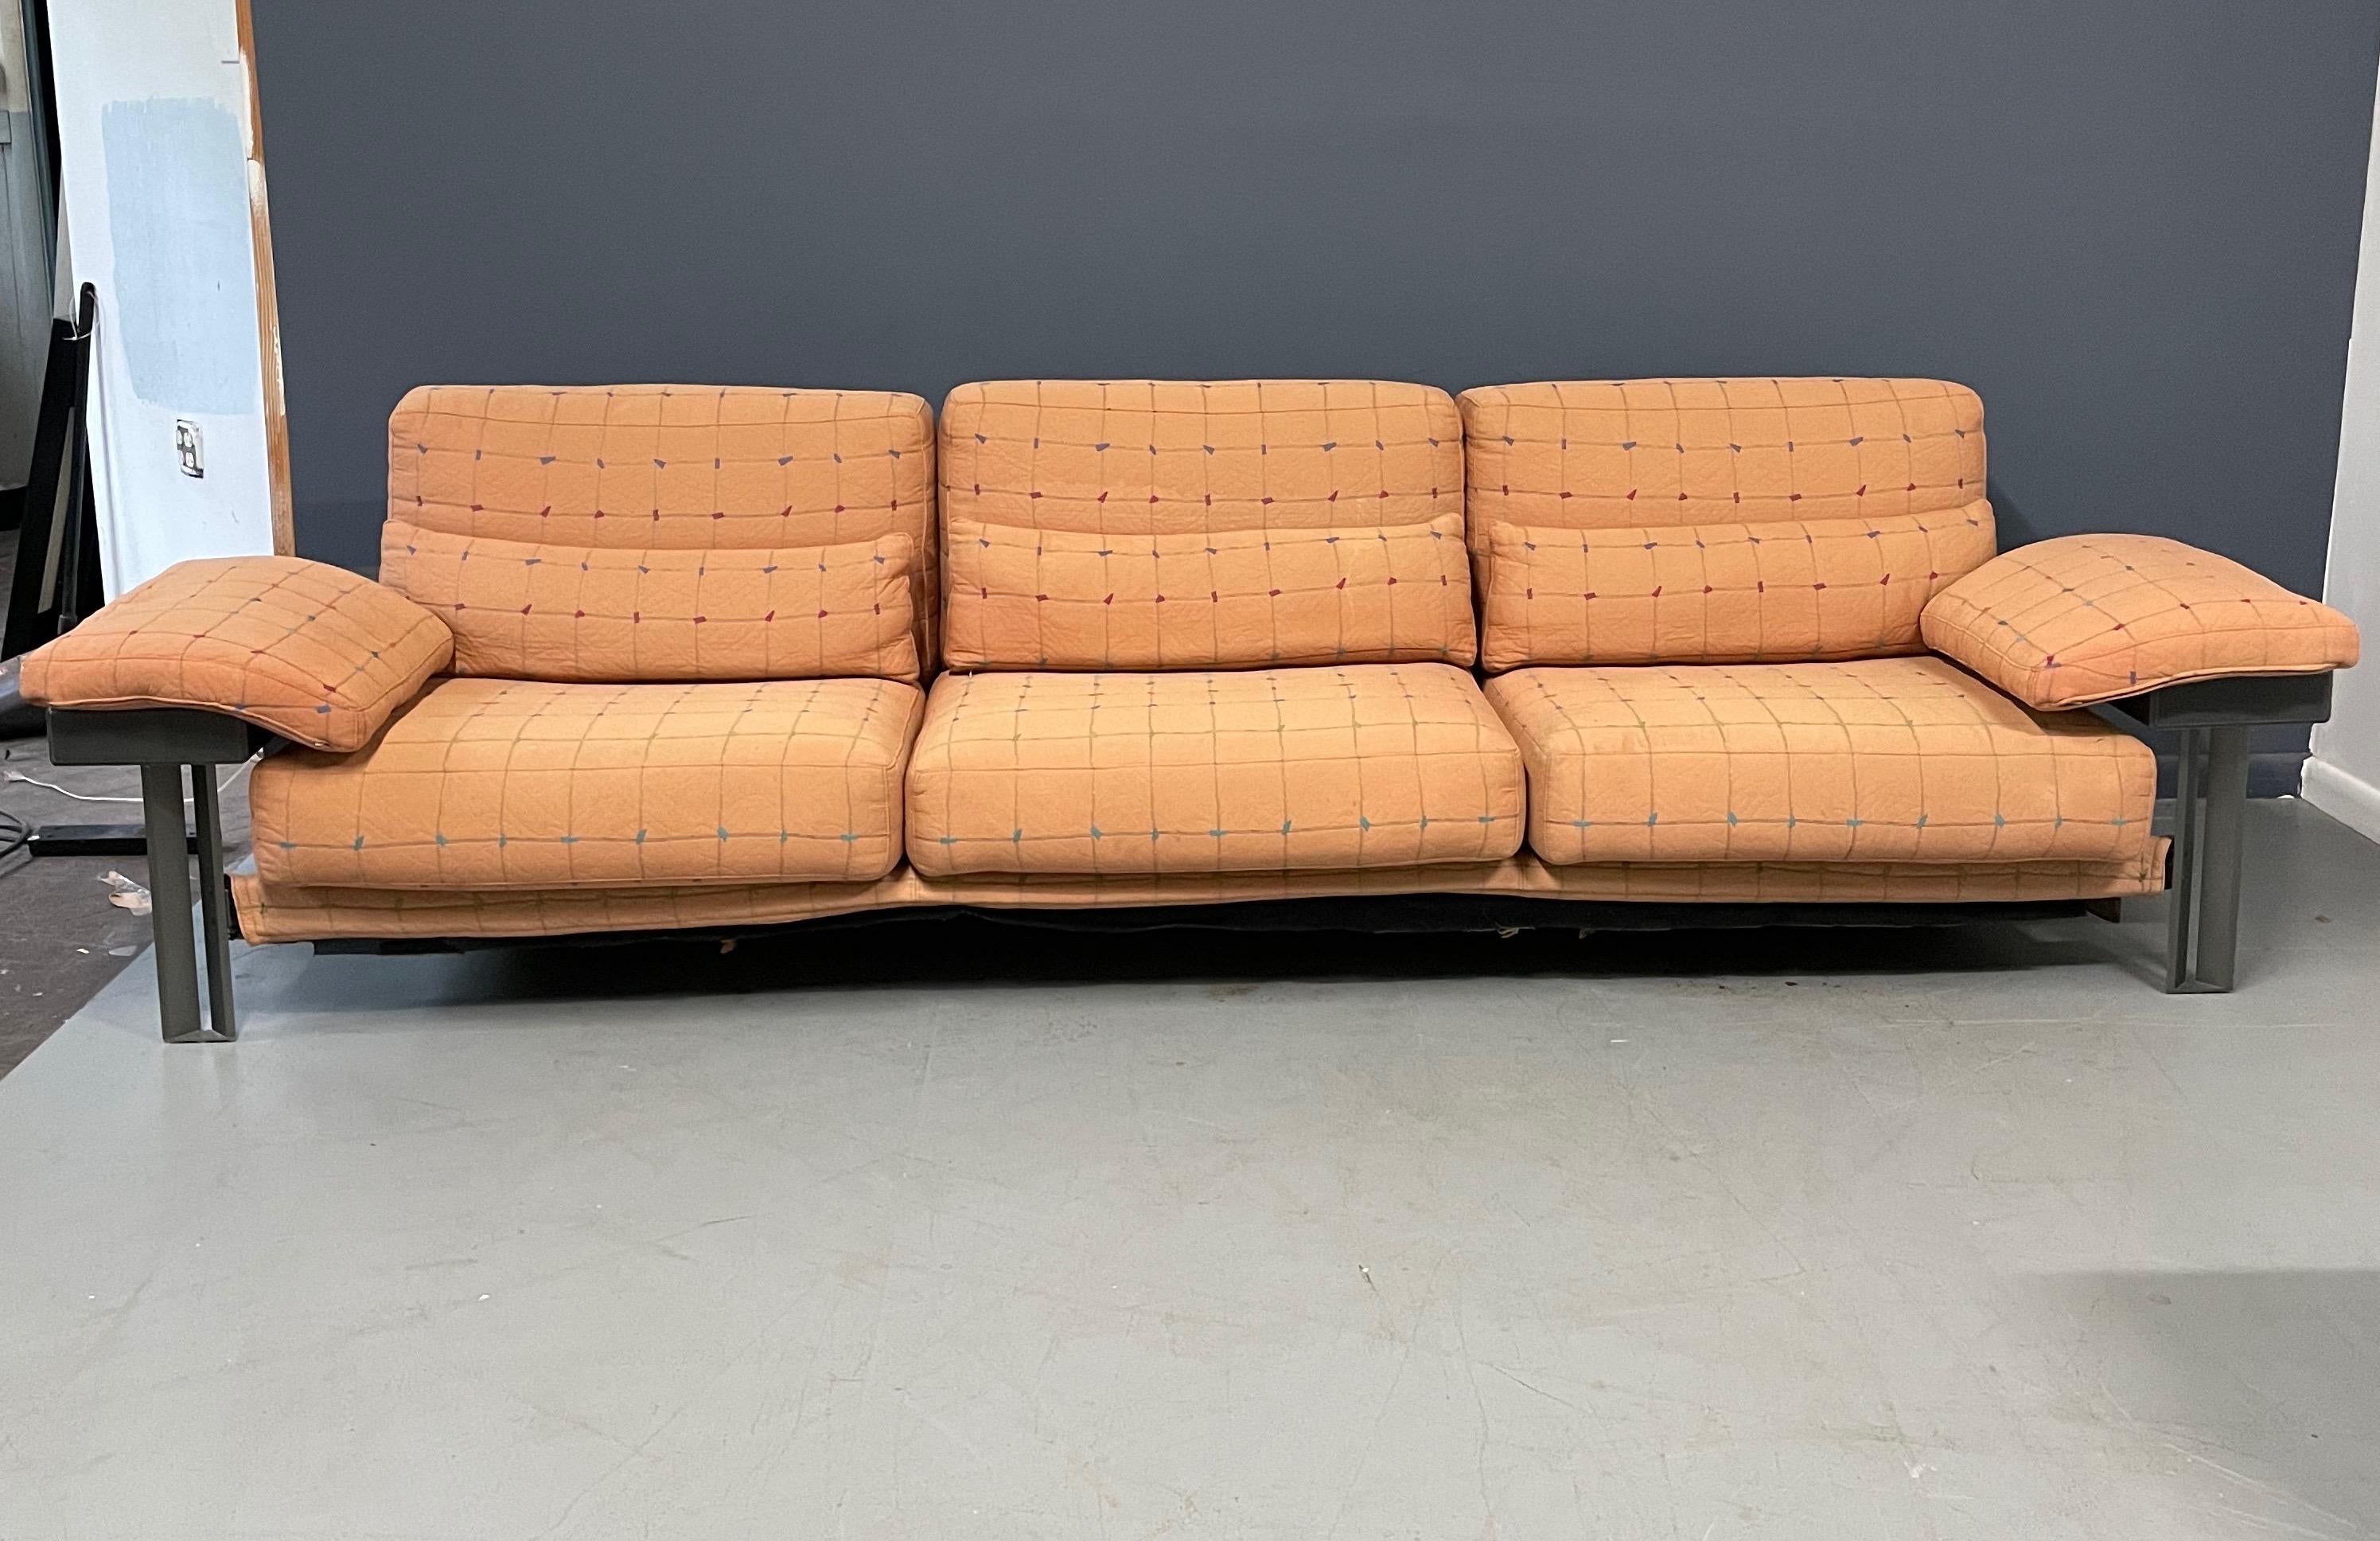 This Saporiti sofa in it's original fabric is meticulously constructed of stainless steel, burl panels and leather arms and full back. This item needs to be reupholstered. We can reupholster this sofa in COM. We can also also reconstruct the back